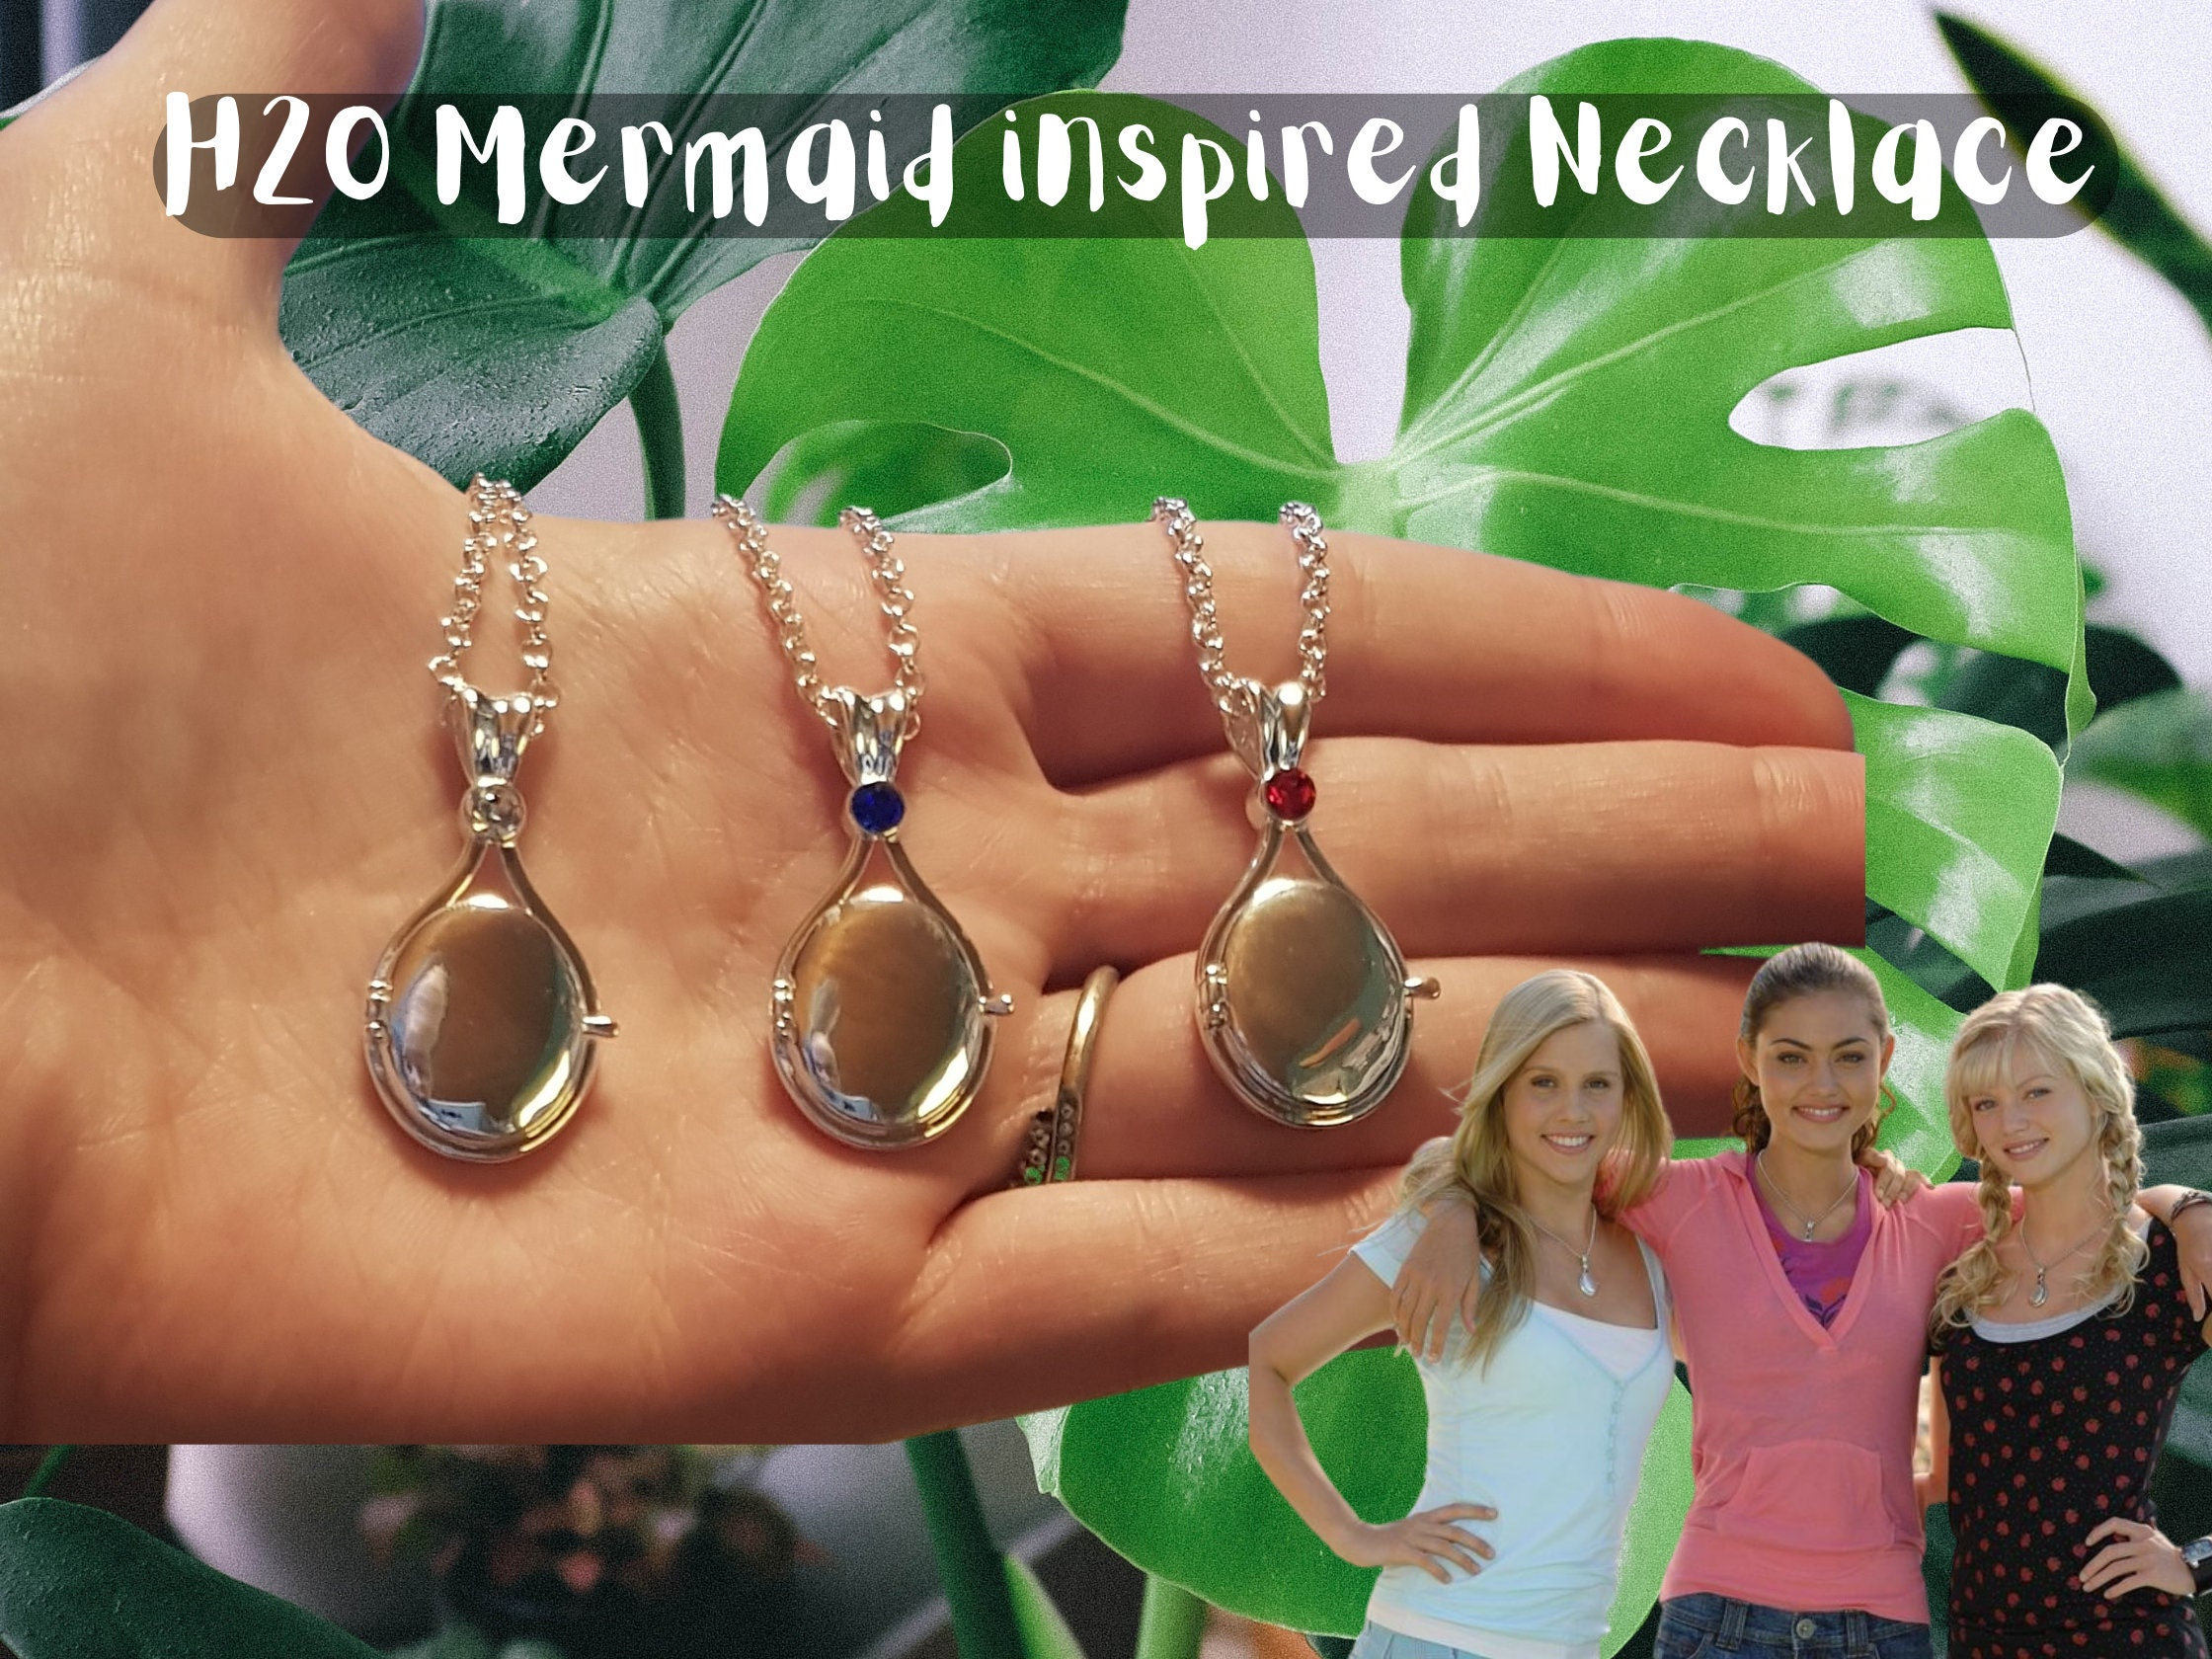 H2O Just Add Water Mermaid Medallion Pendant Amulet Necklace image